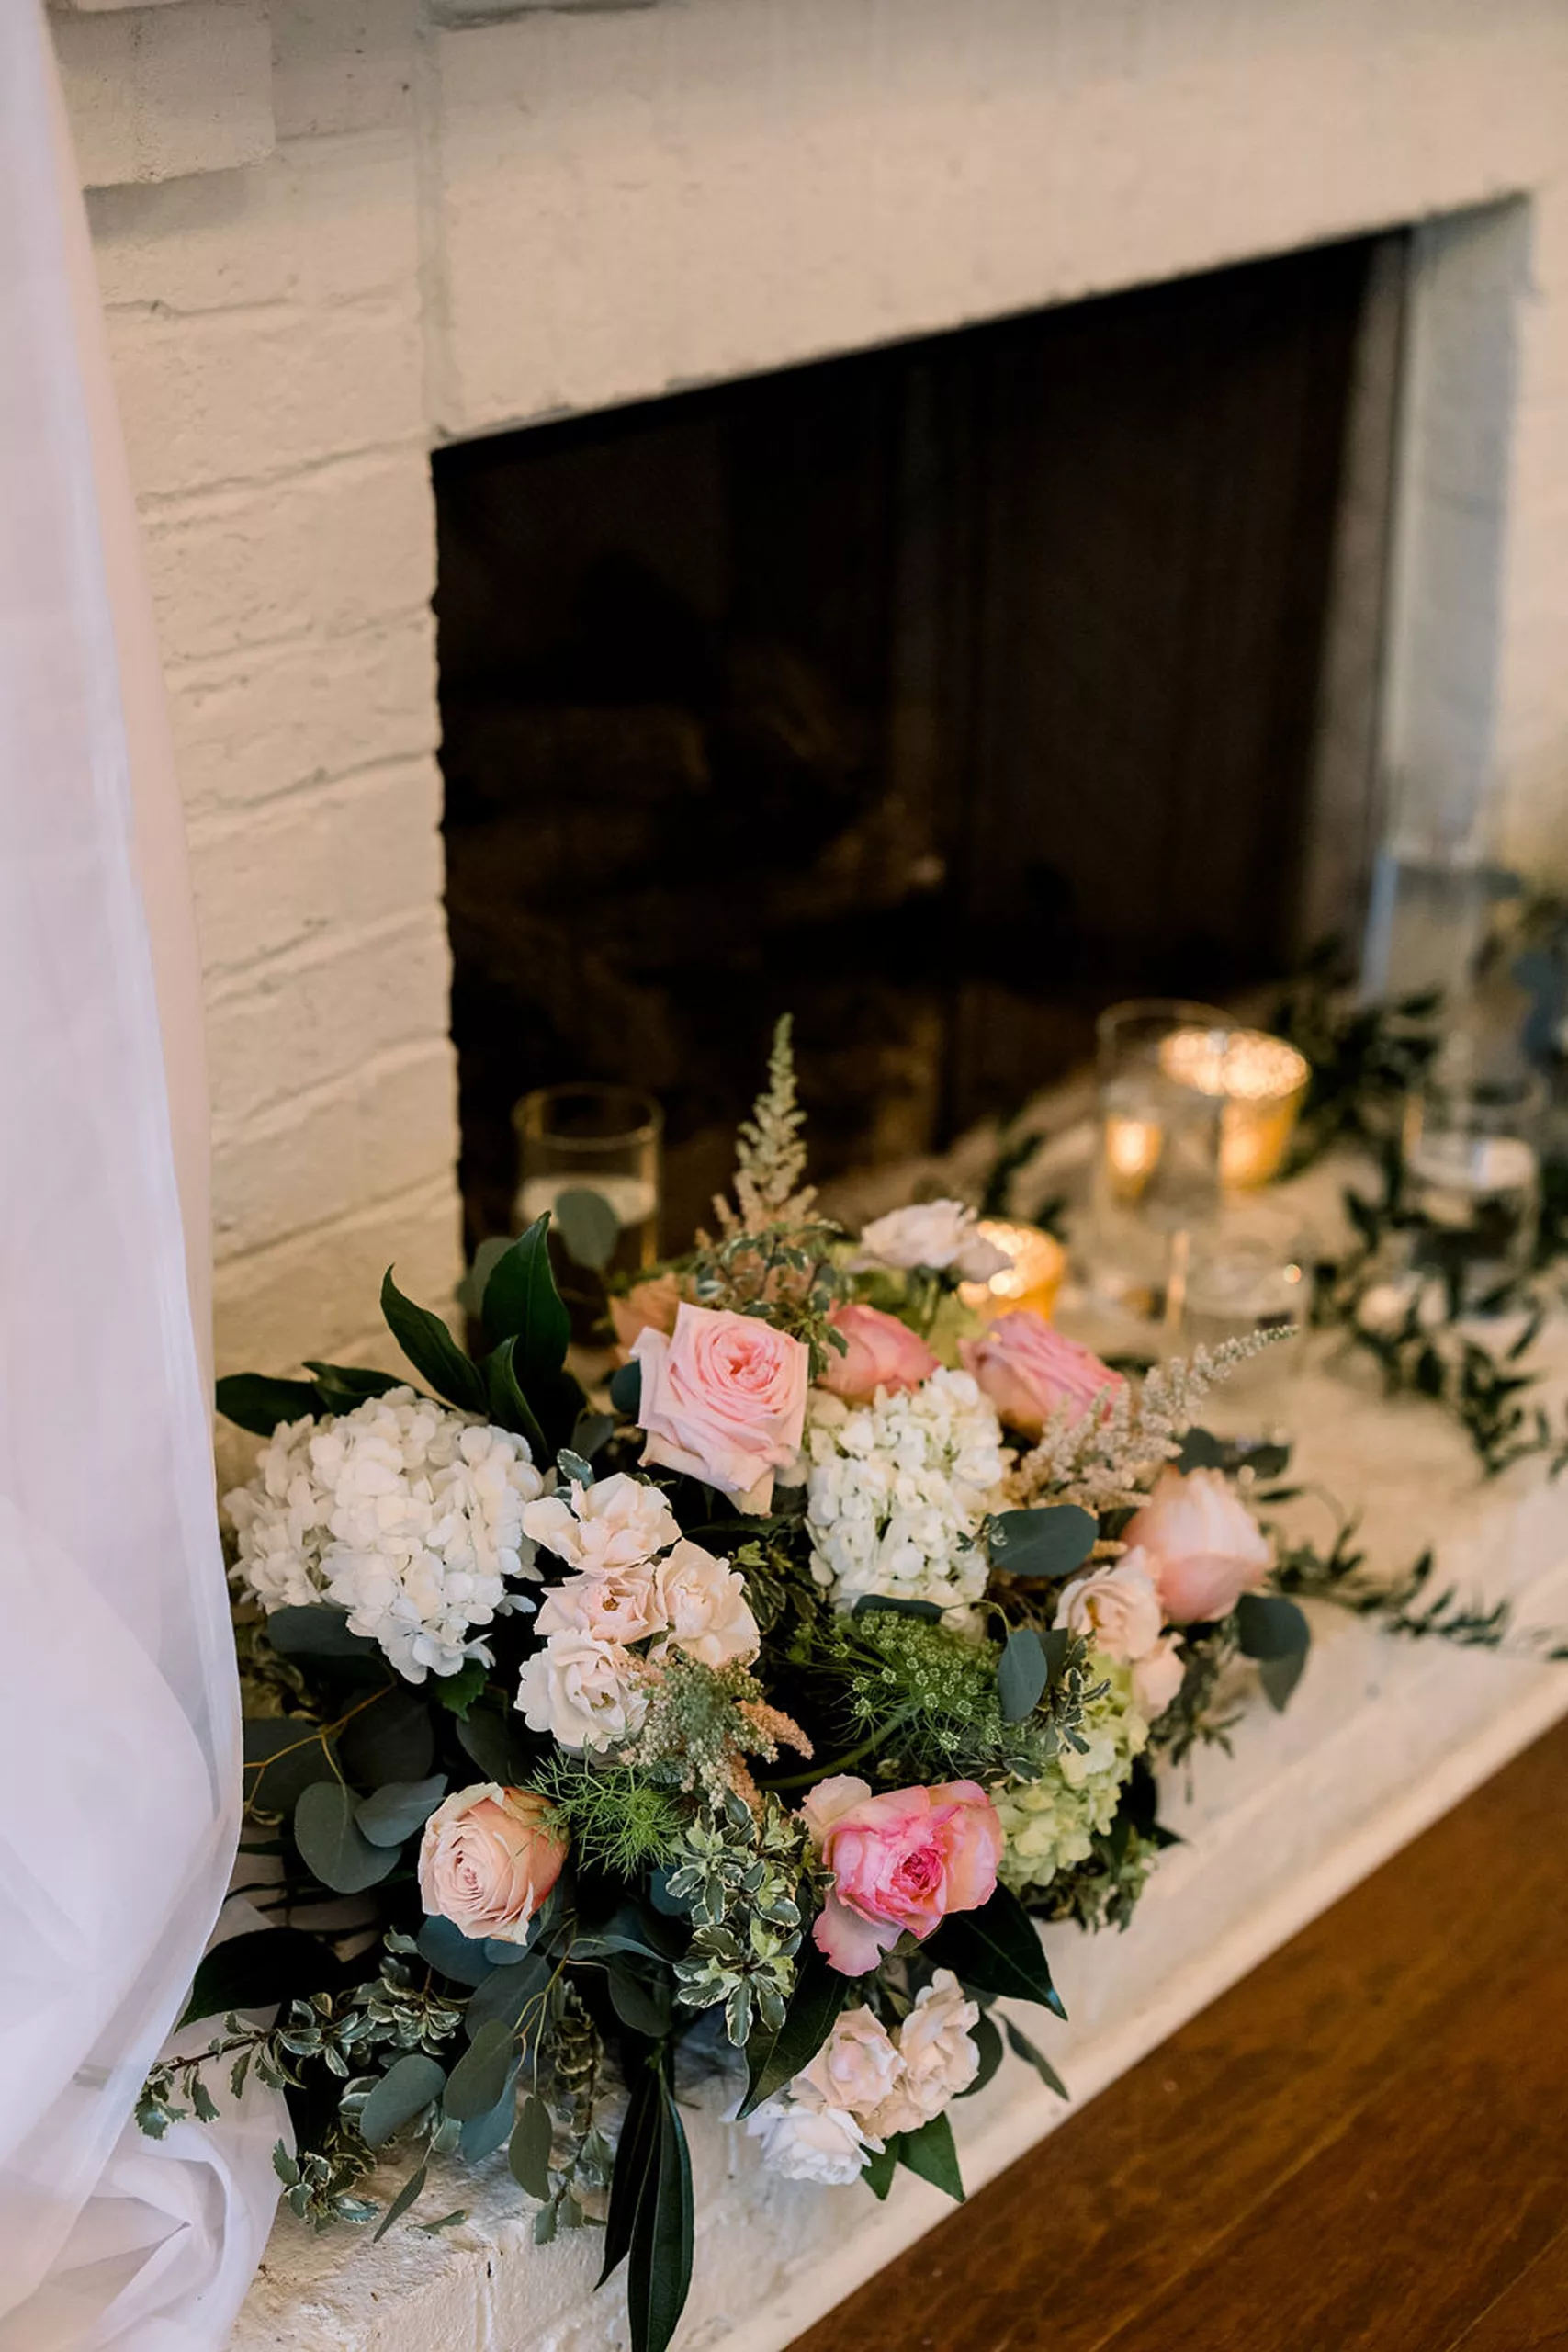 Details of pink and white flowers decorating a white fireplace at the payne-corley house wedding venue